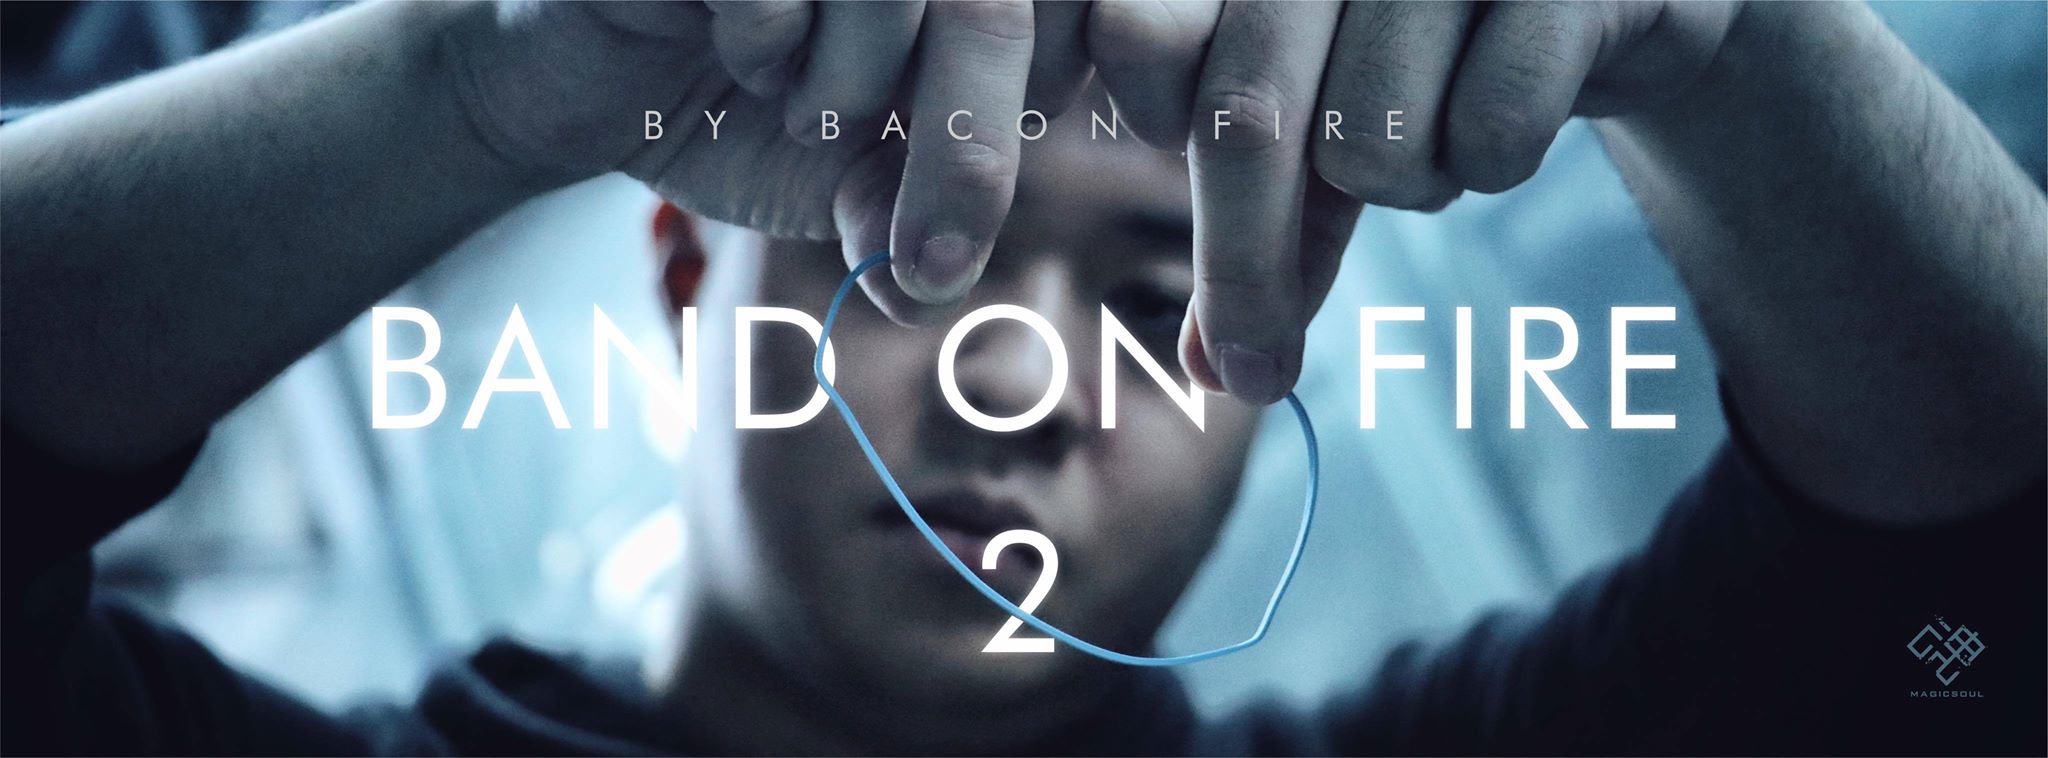 Bacon Fire - Band on Fire 2